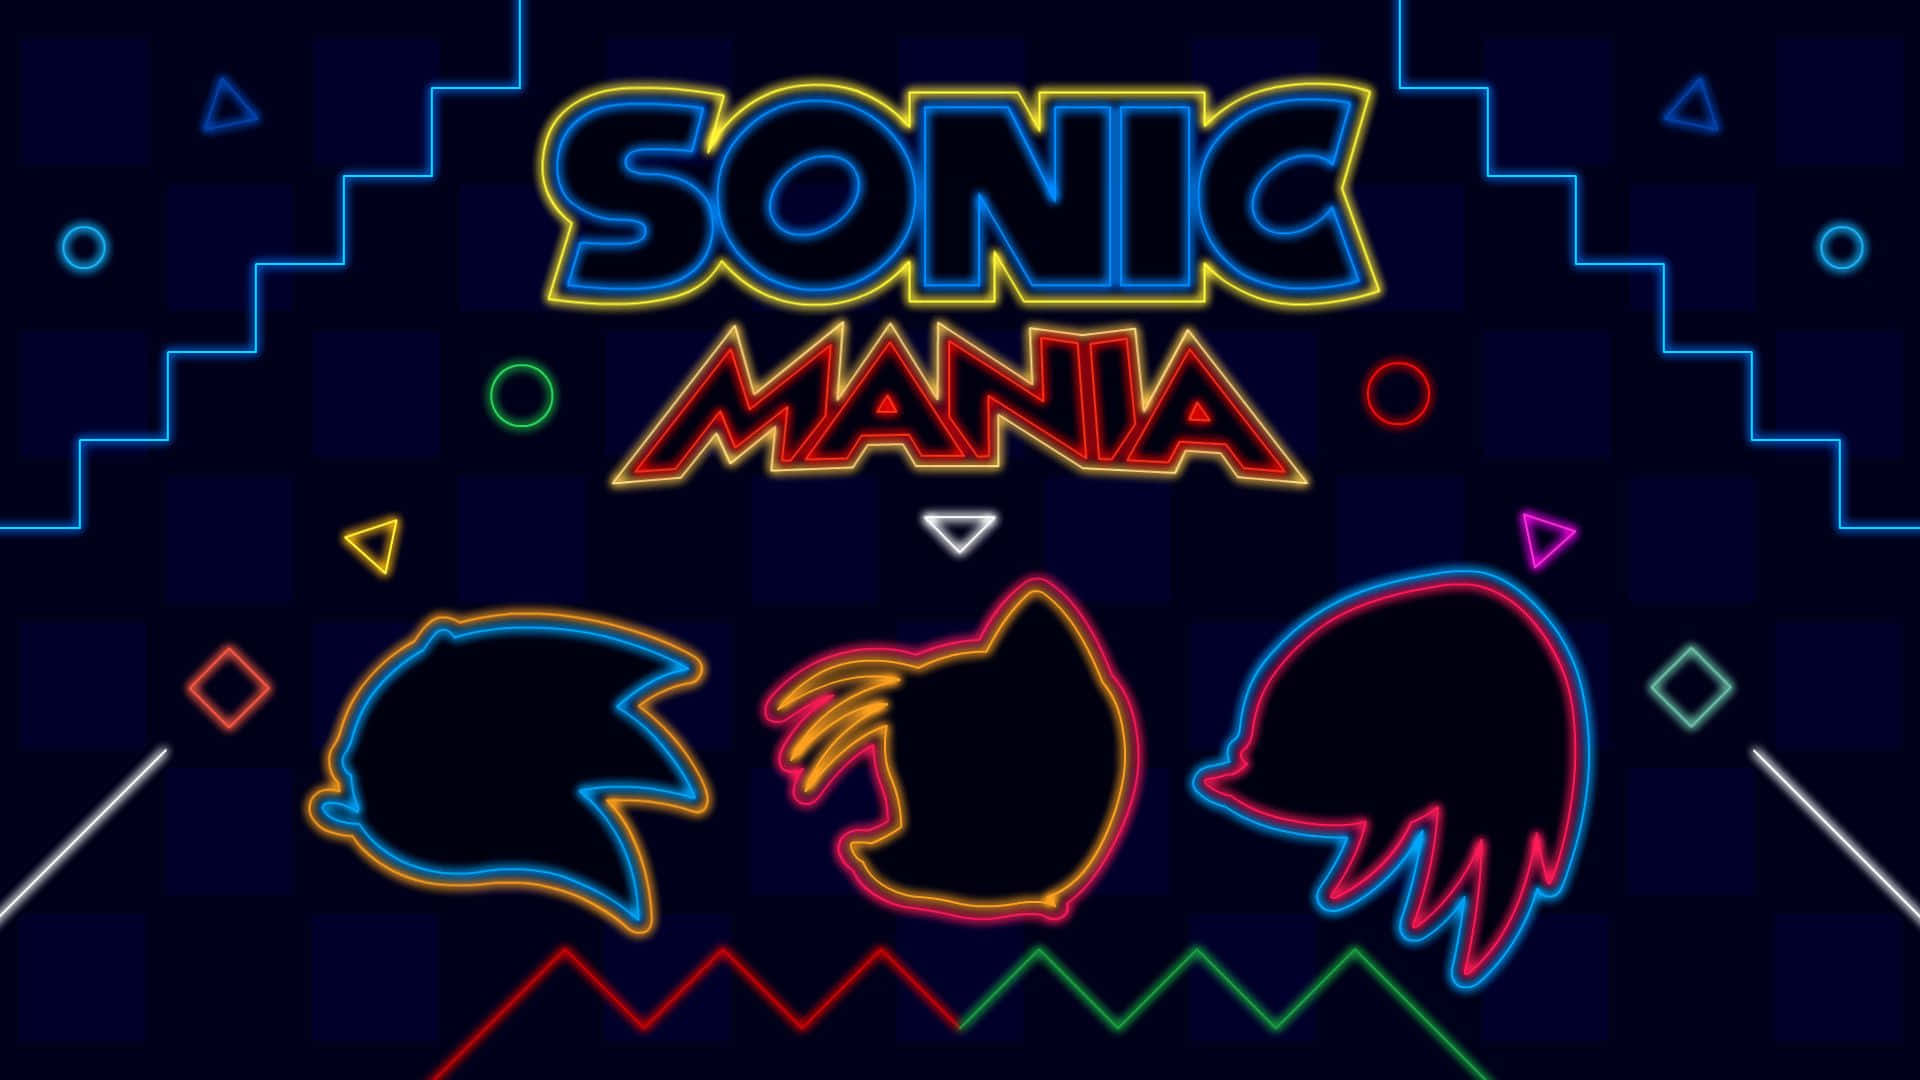 Cool Ps4 Sonic Mania With Neon Colored Design Background